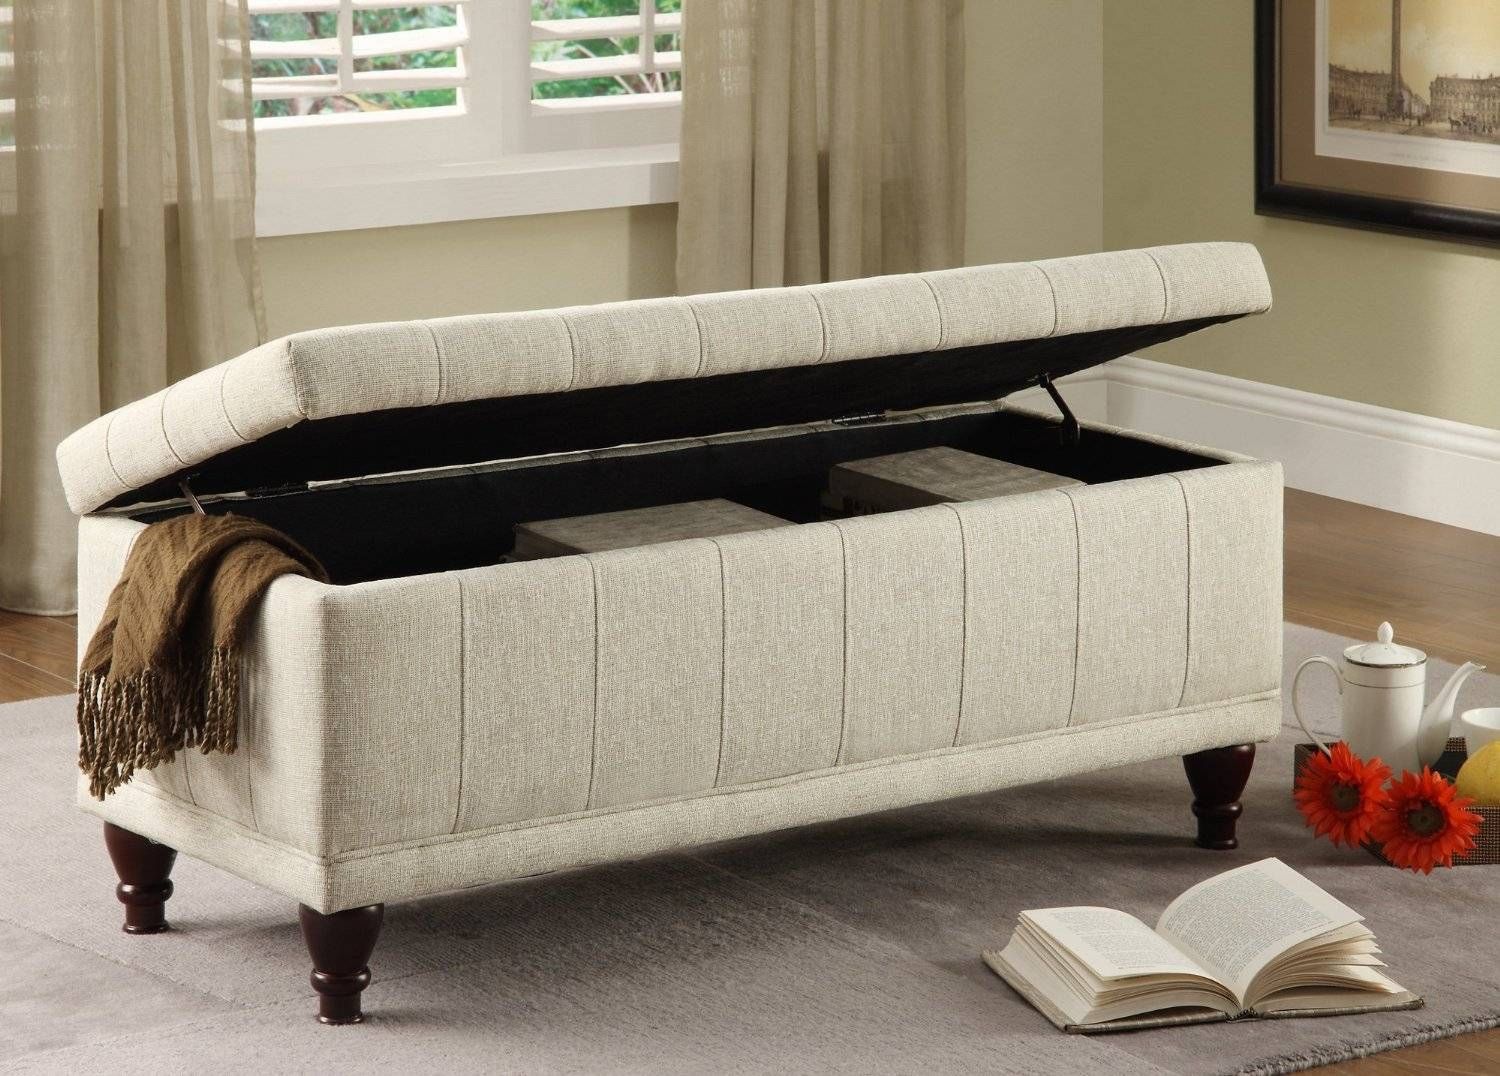 Bedroom Benches With Storage Ideas | Homesfeed Pertaining To Bedroom Bench Sofas (View 12 of 15)